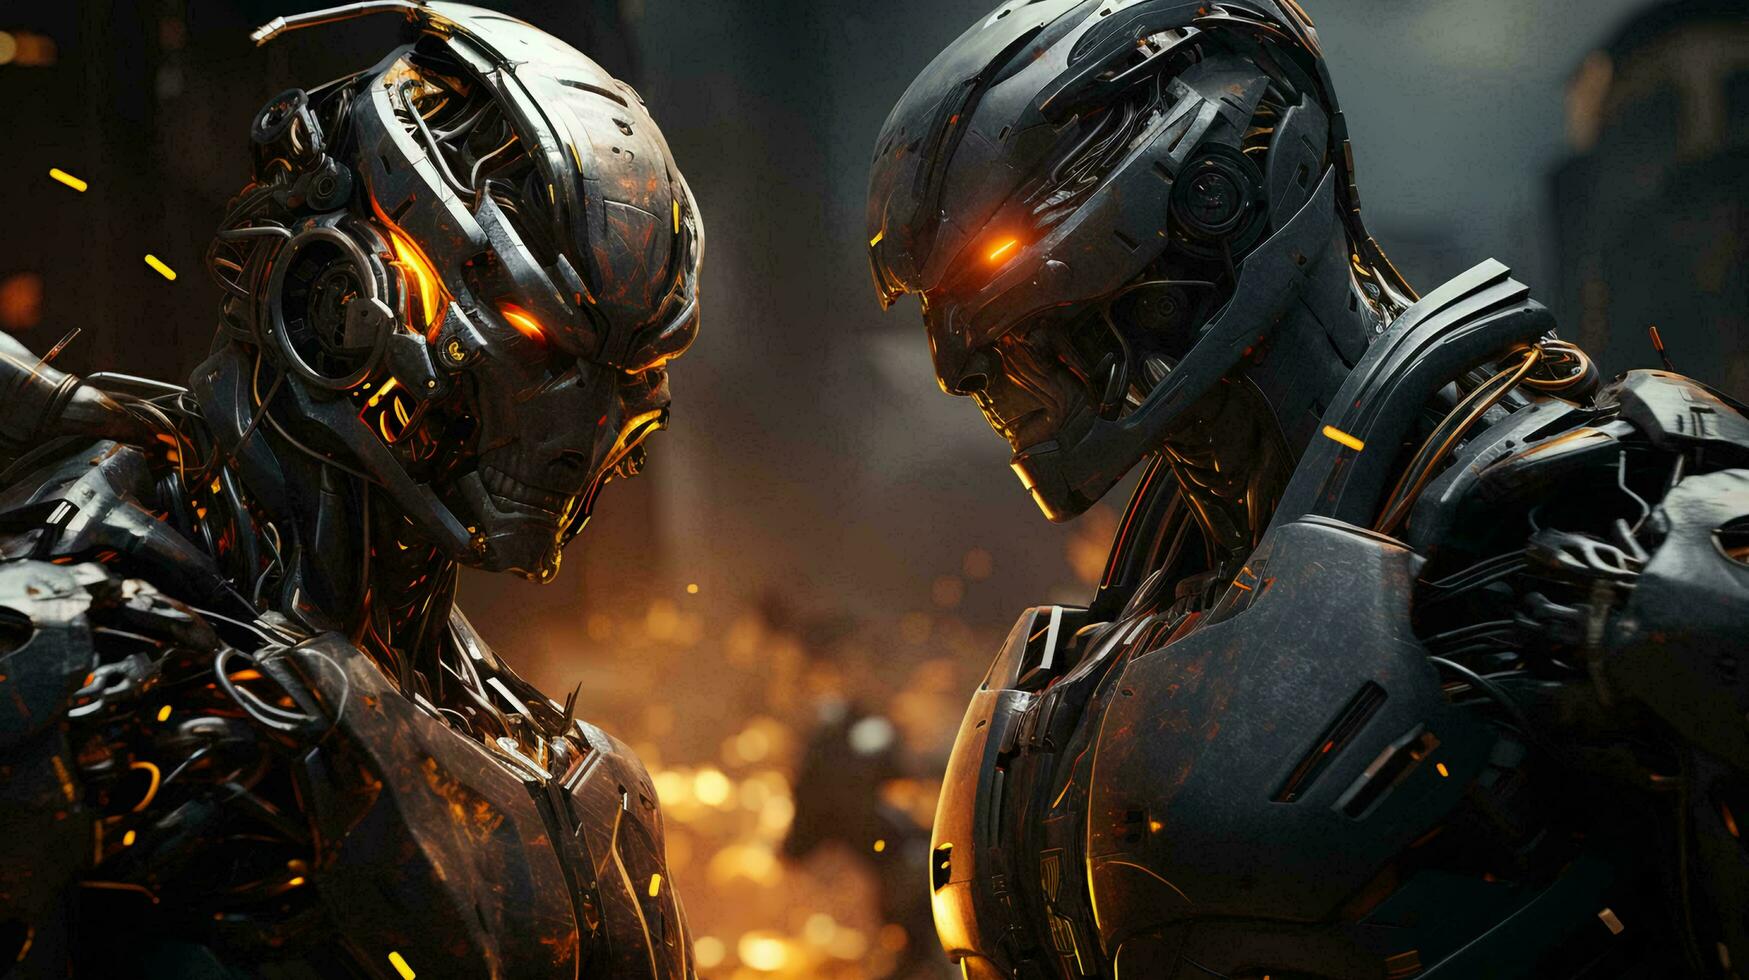 Fight of two futuristic robots with metal details photo